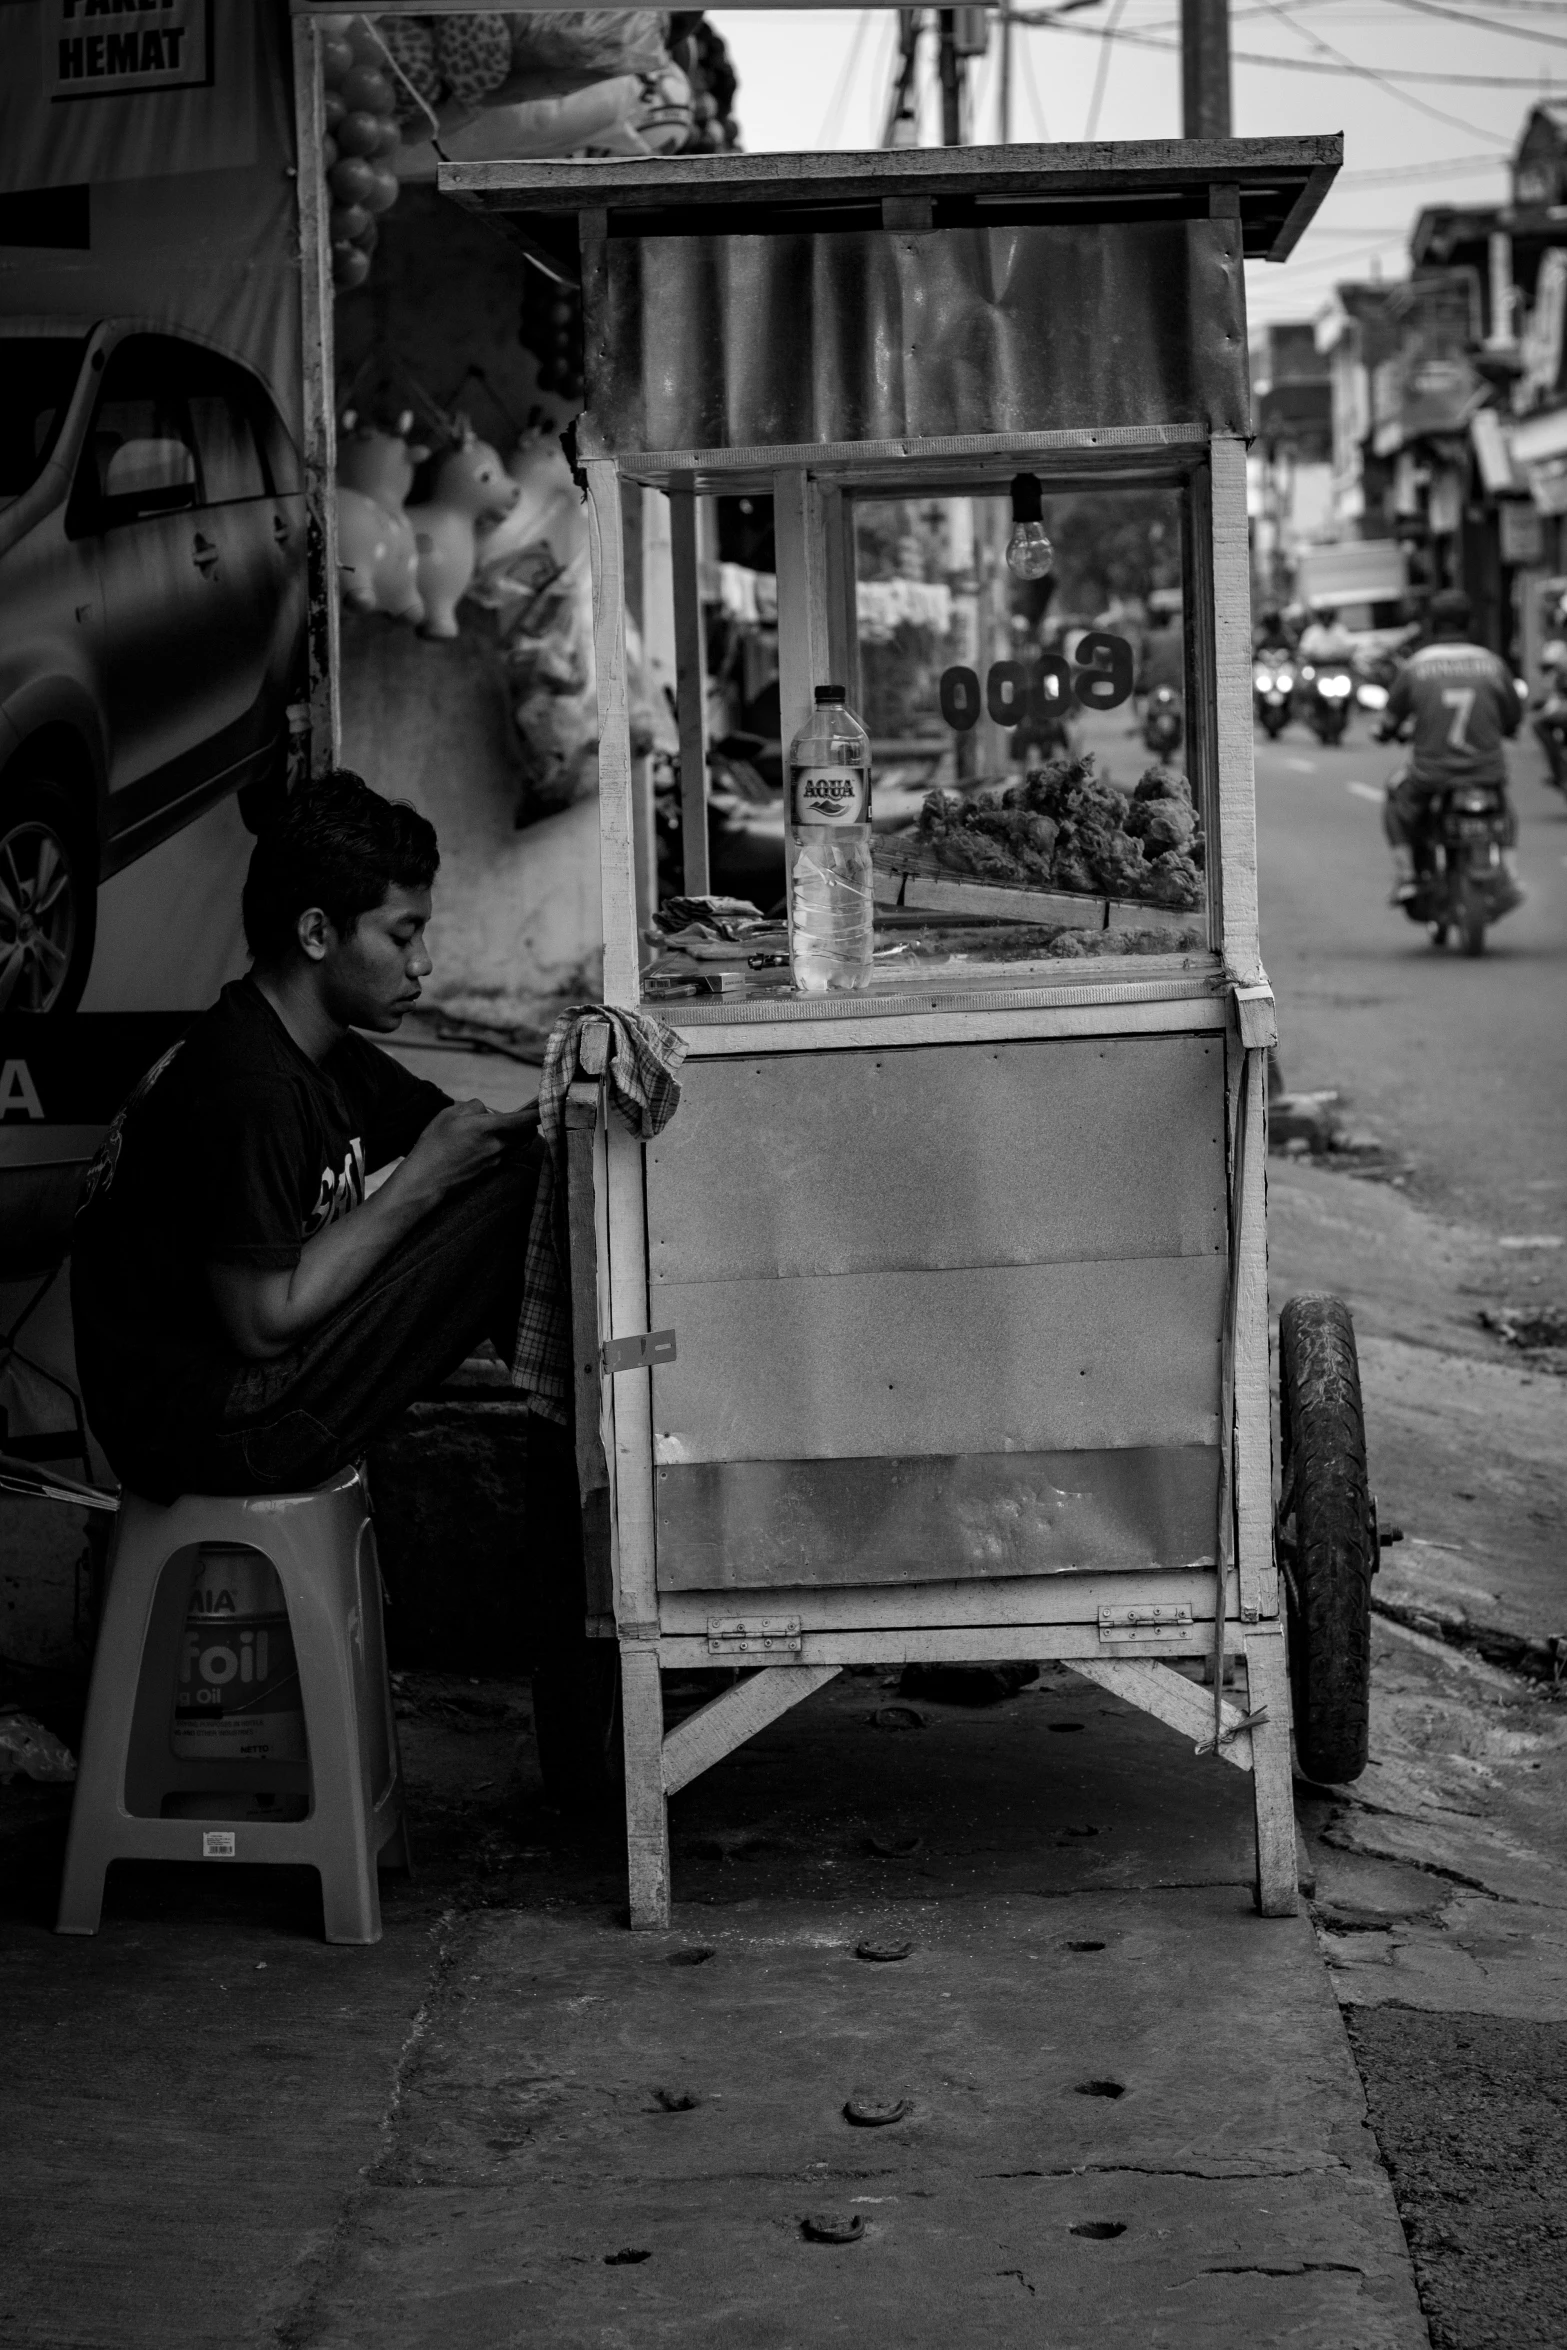 man at a fruit stand sitting on a side walk